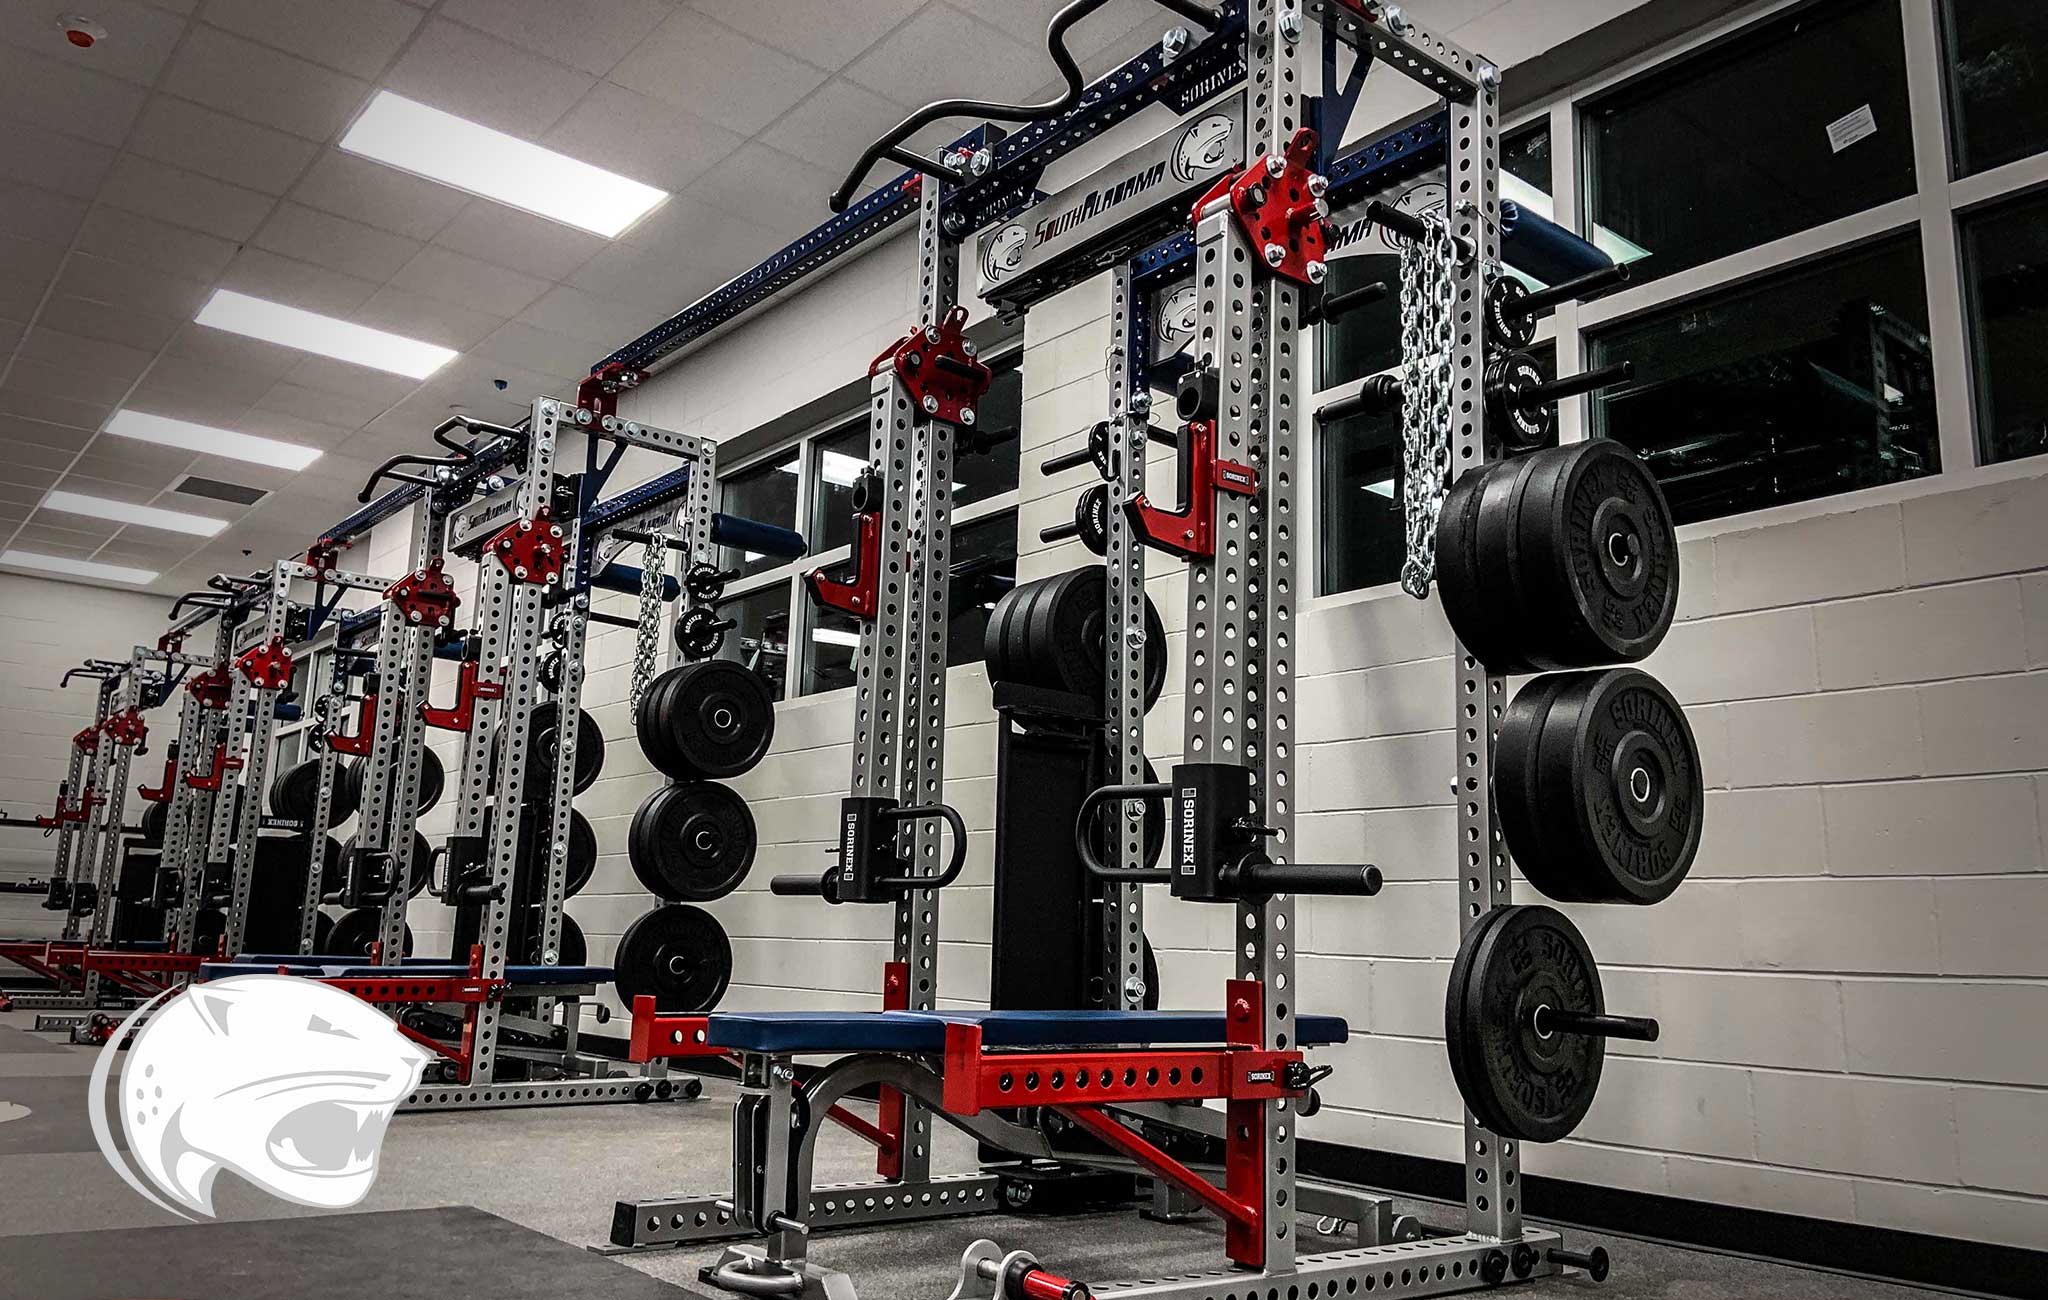 University of South Alabama Sorinex strength and conditioning facility